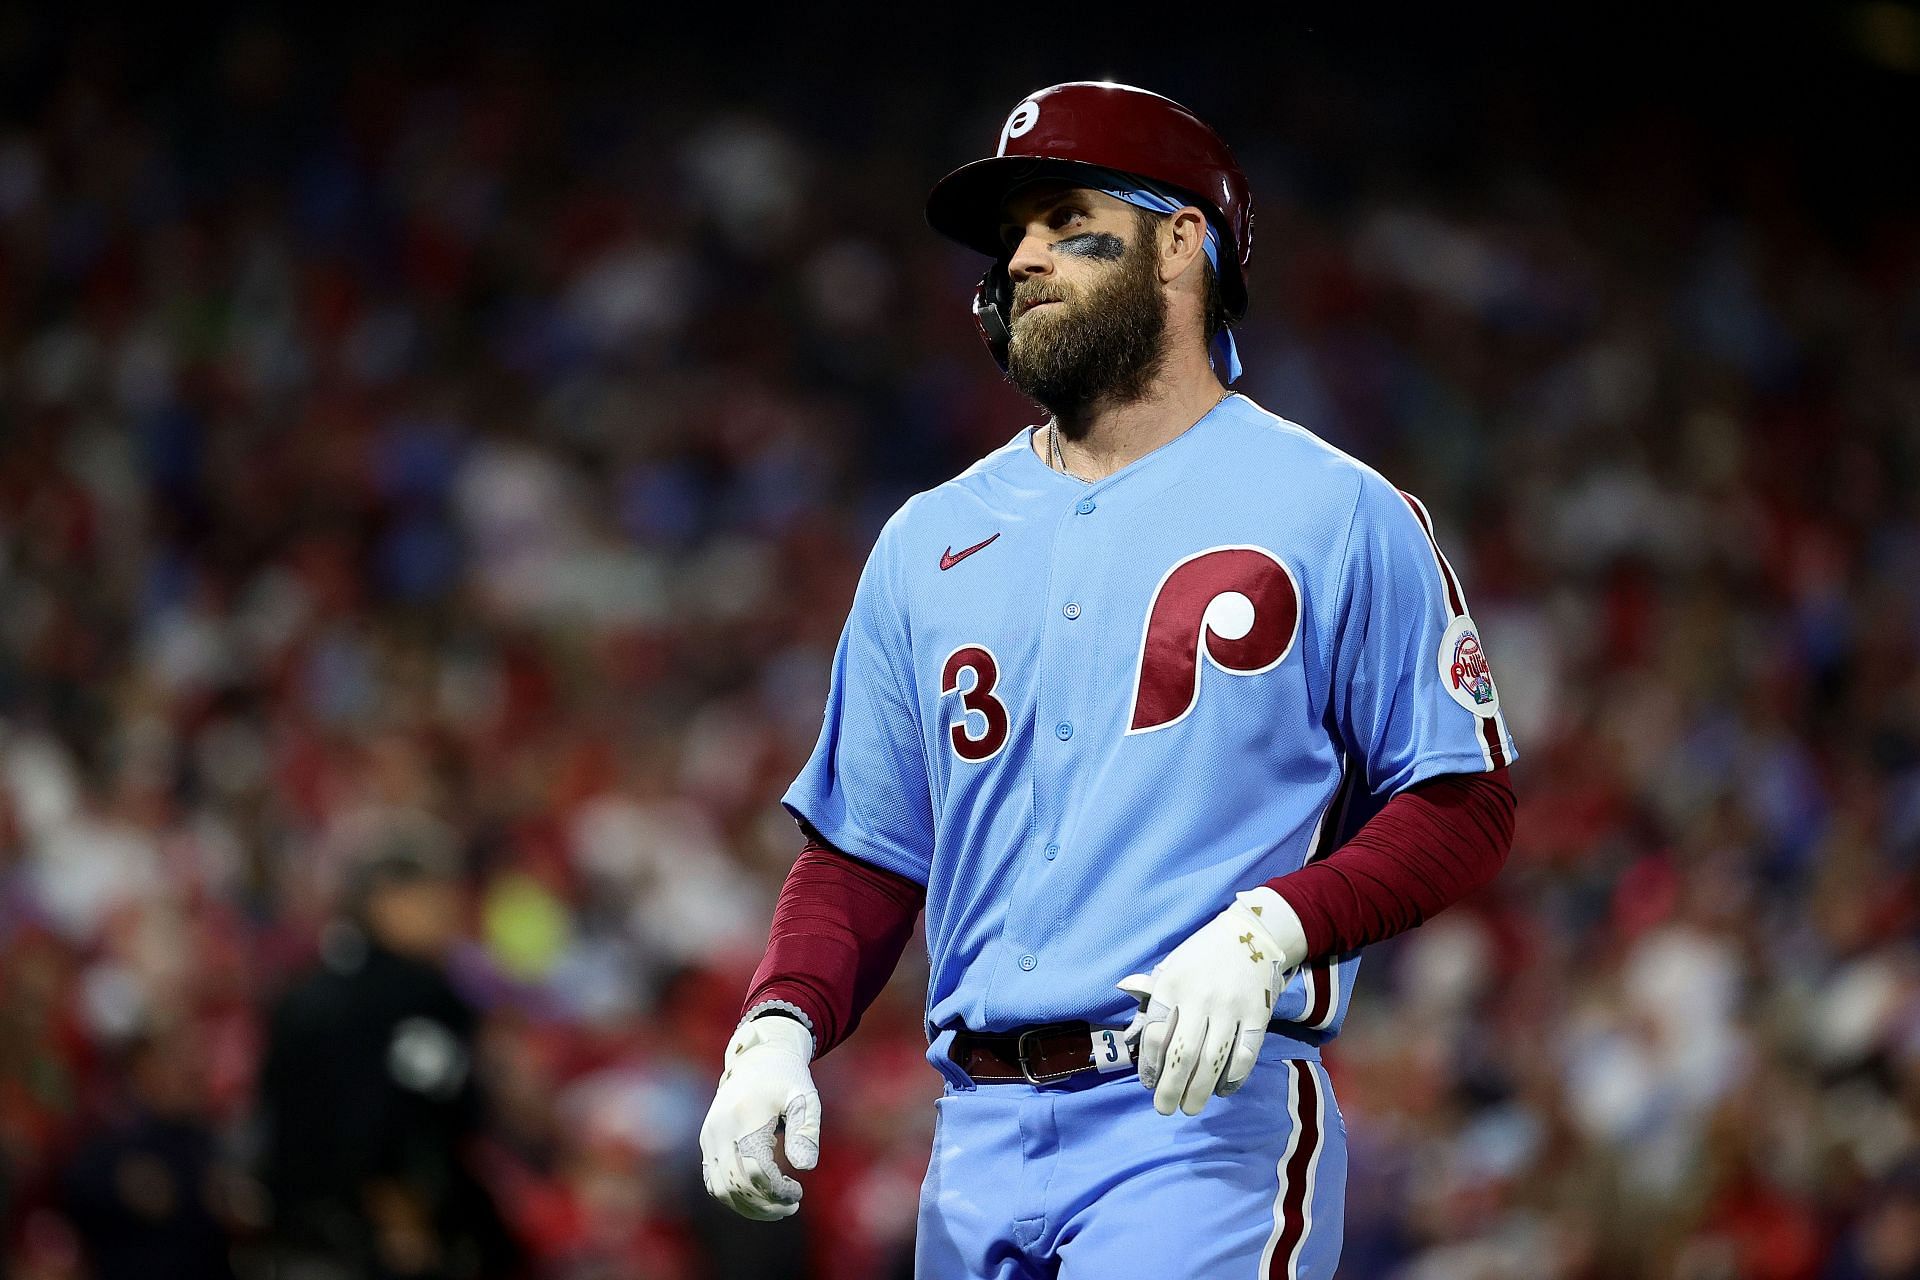 Bryce Harper makes return to Phillies after quick Tommy John recovery